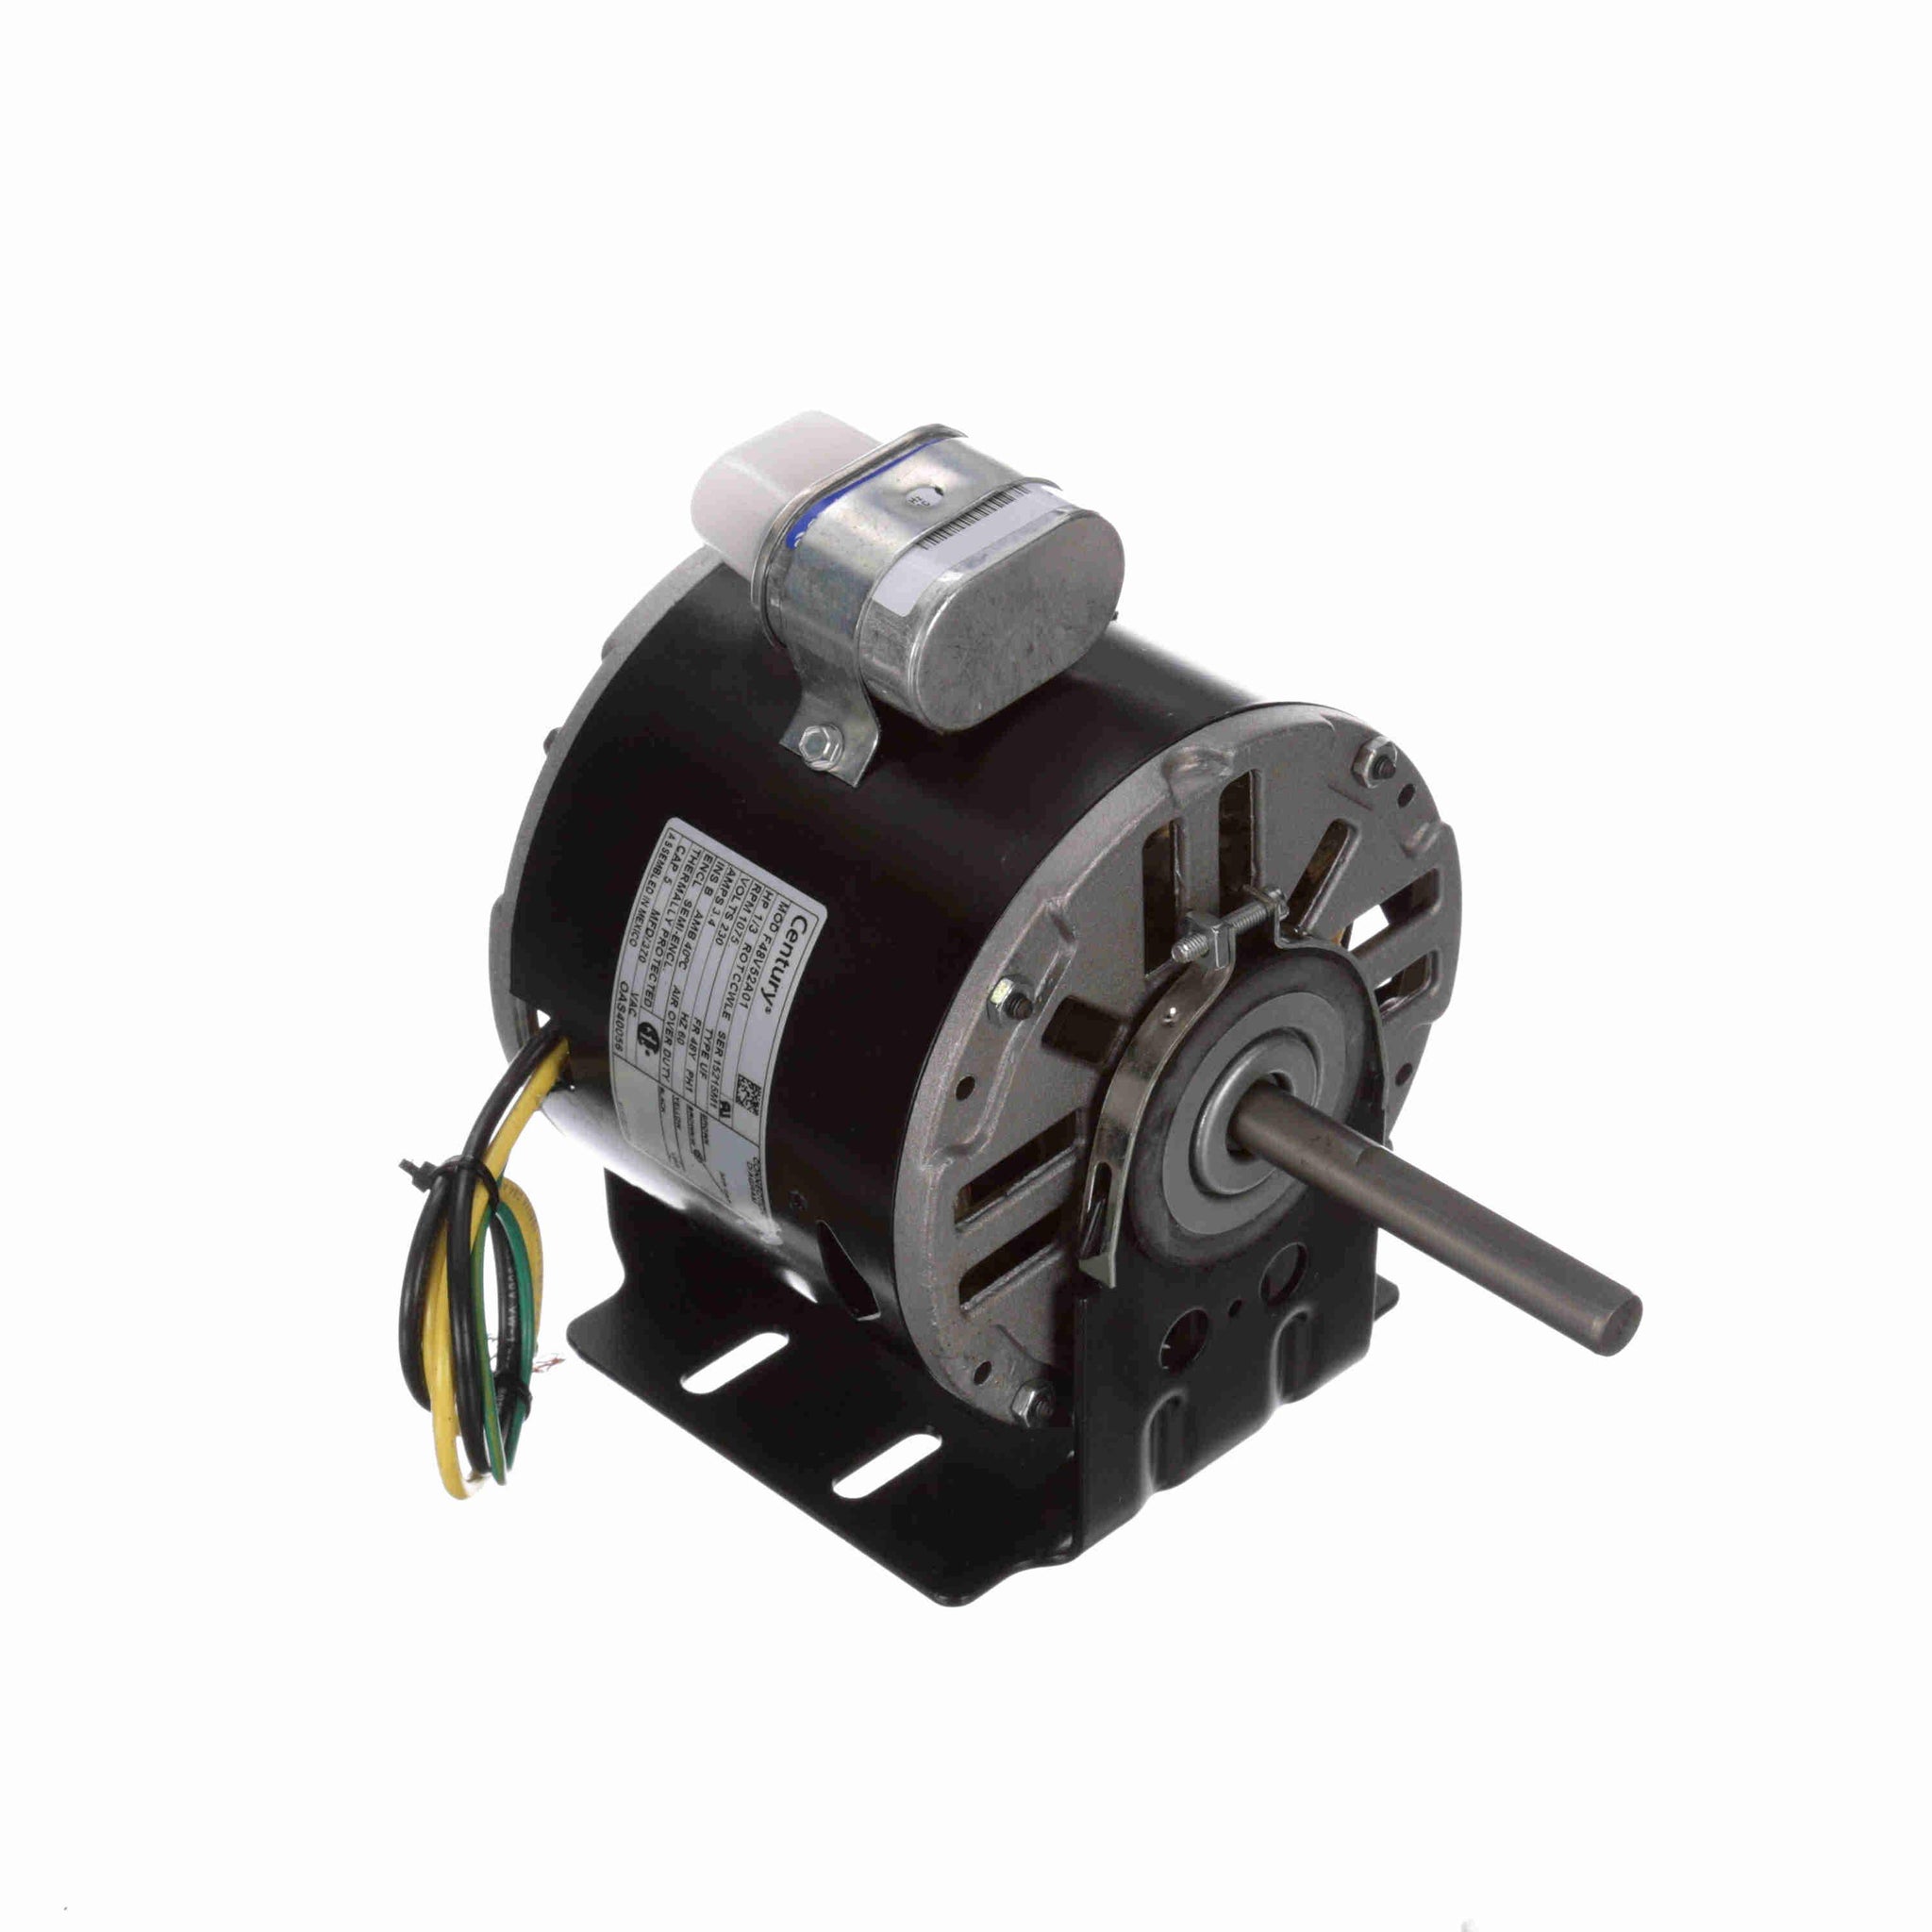 OAS40056 - 1/3 HP OEM Replacement Motor, 1075 RPM, 230 Volts, 48 Frame, Semi Enclosed - Hardware & Moreee